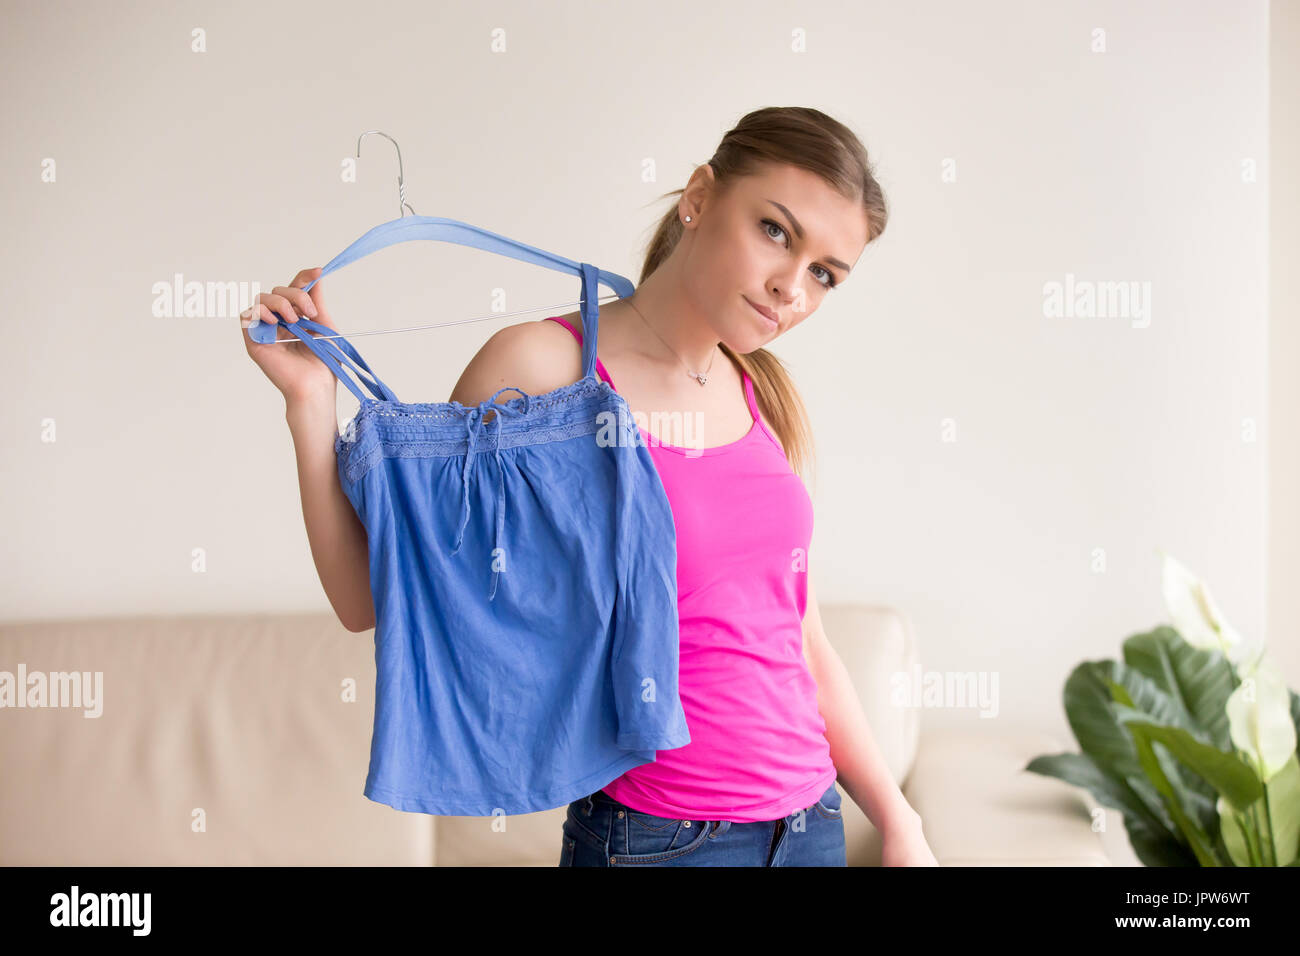 Pensive lady standing with blouse on hanger Stock Photo